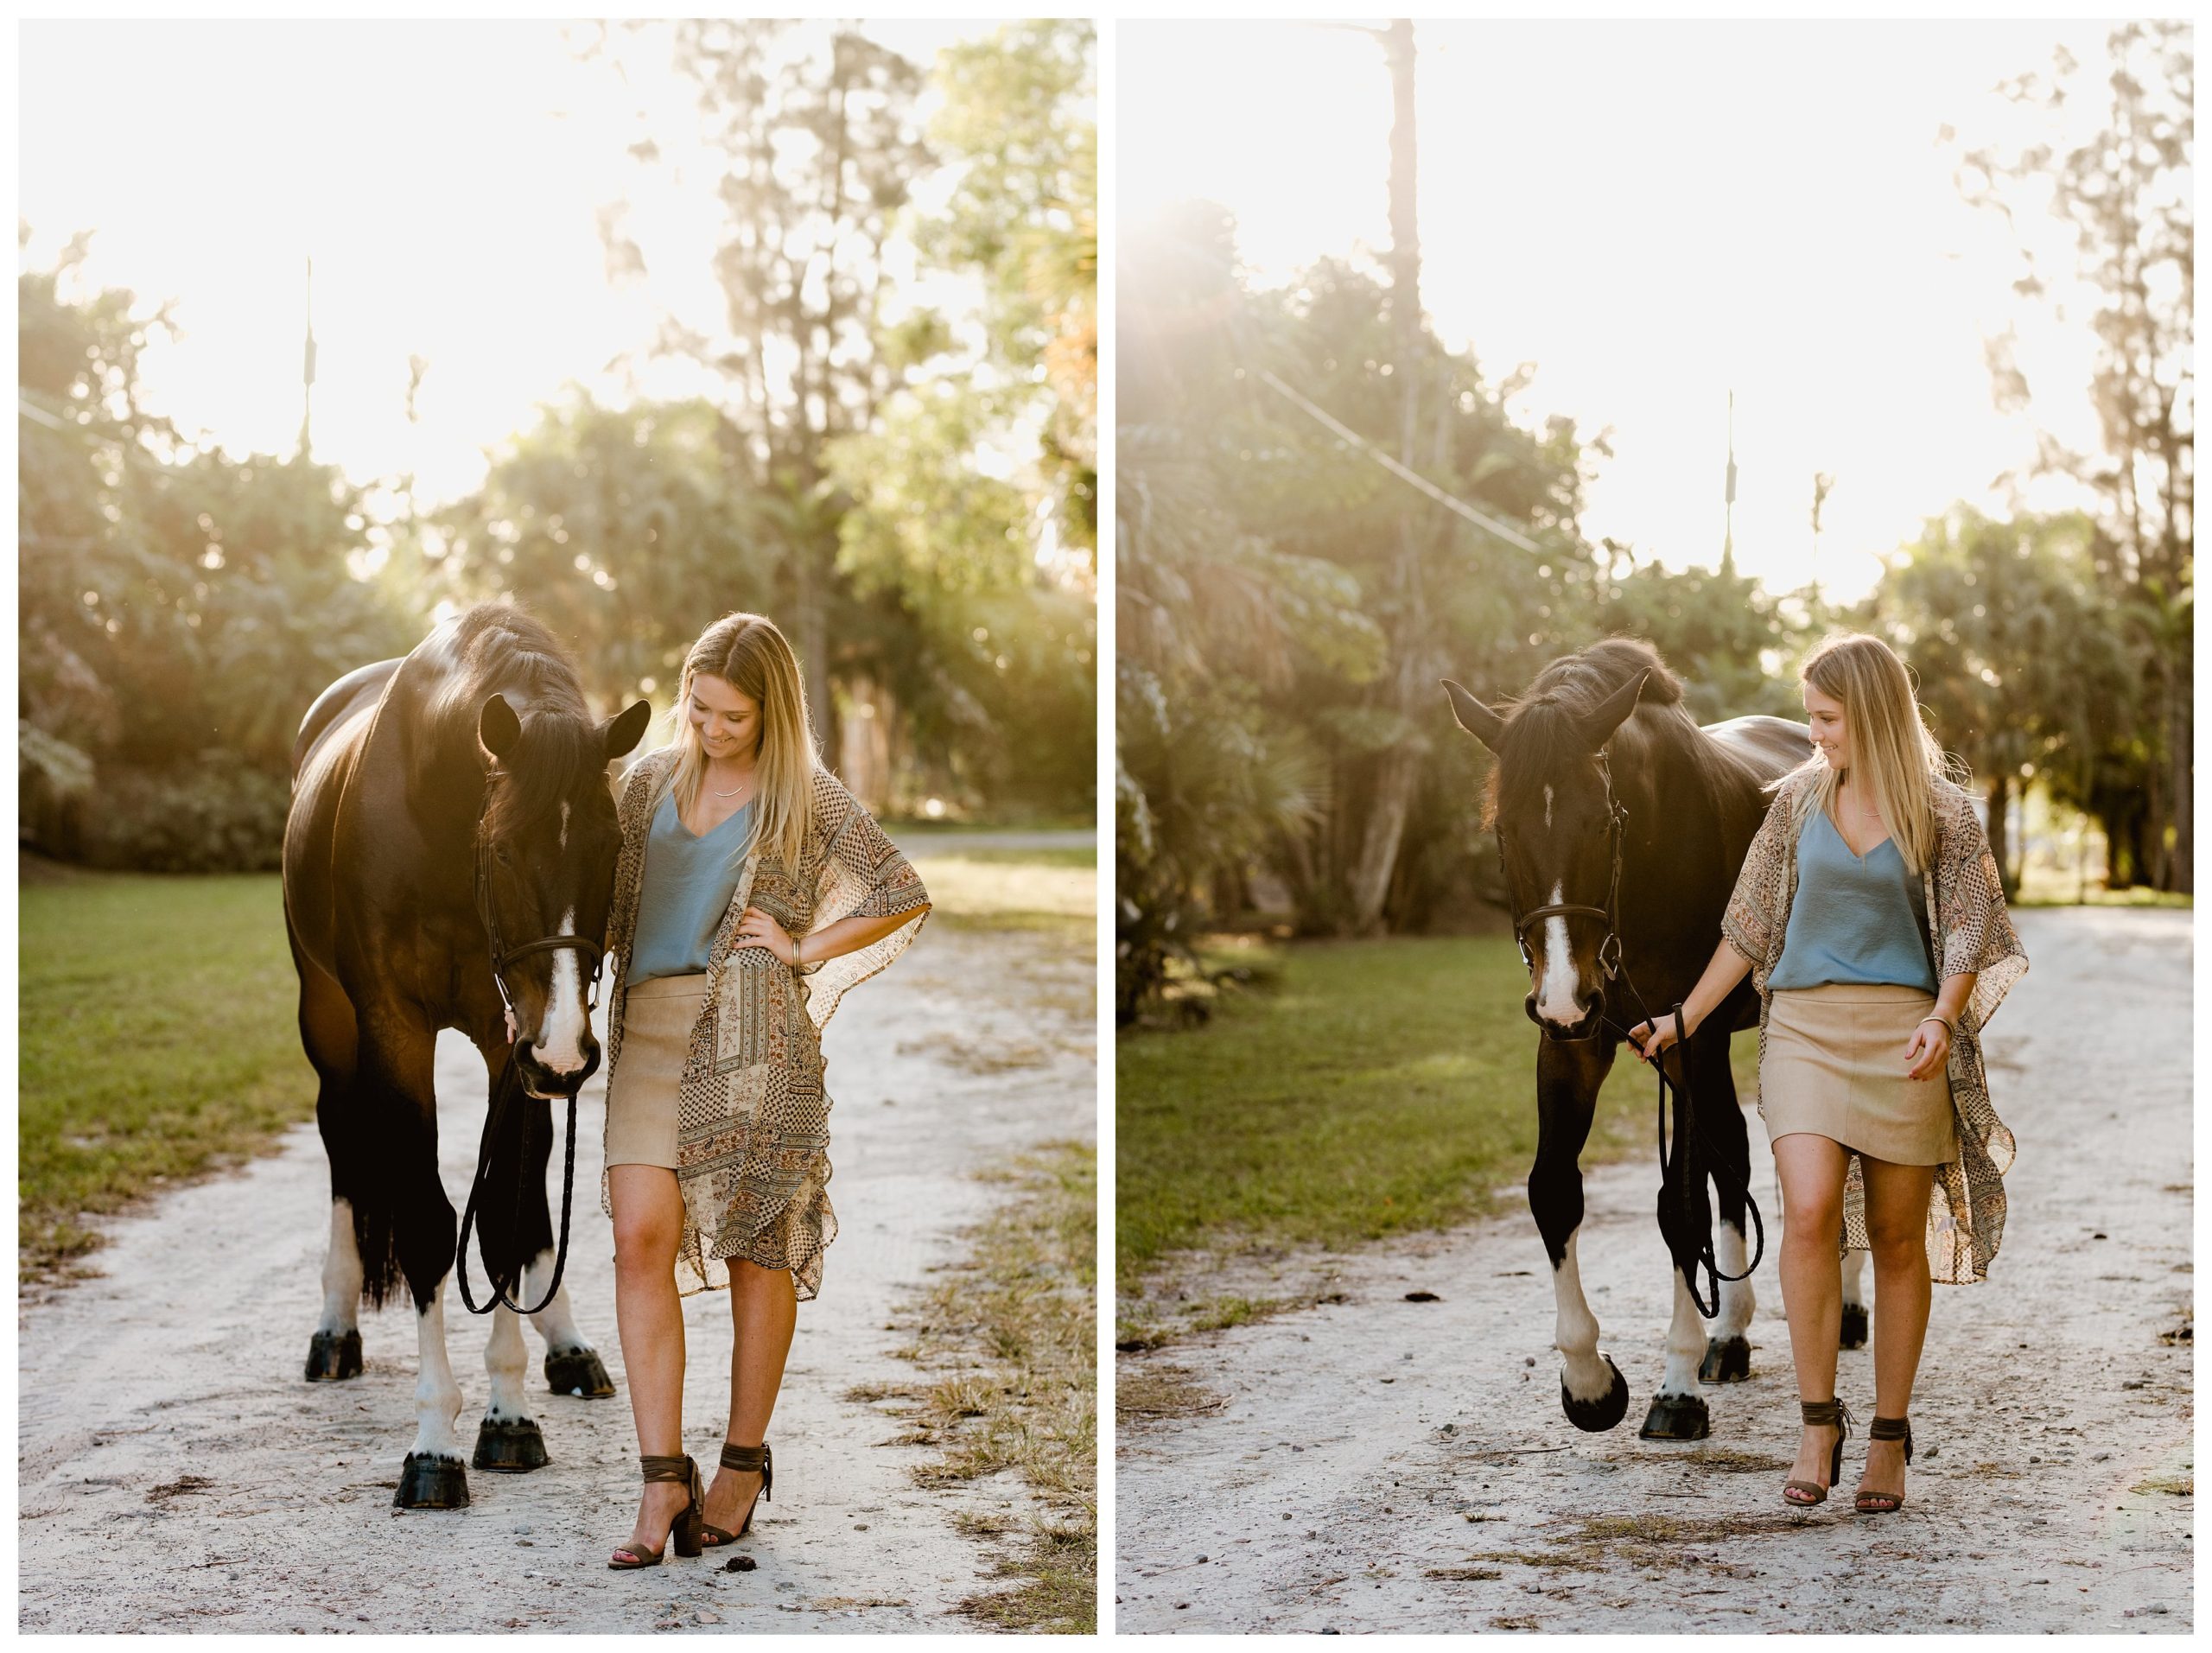 Equestrian photographer in florida during the gorgeous golden hour in wellington, florida.